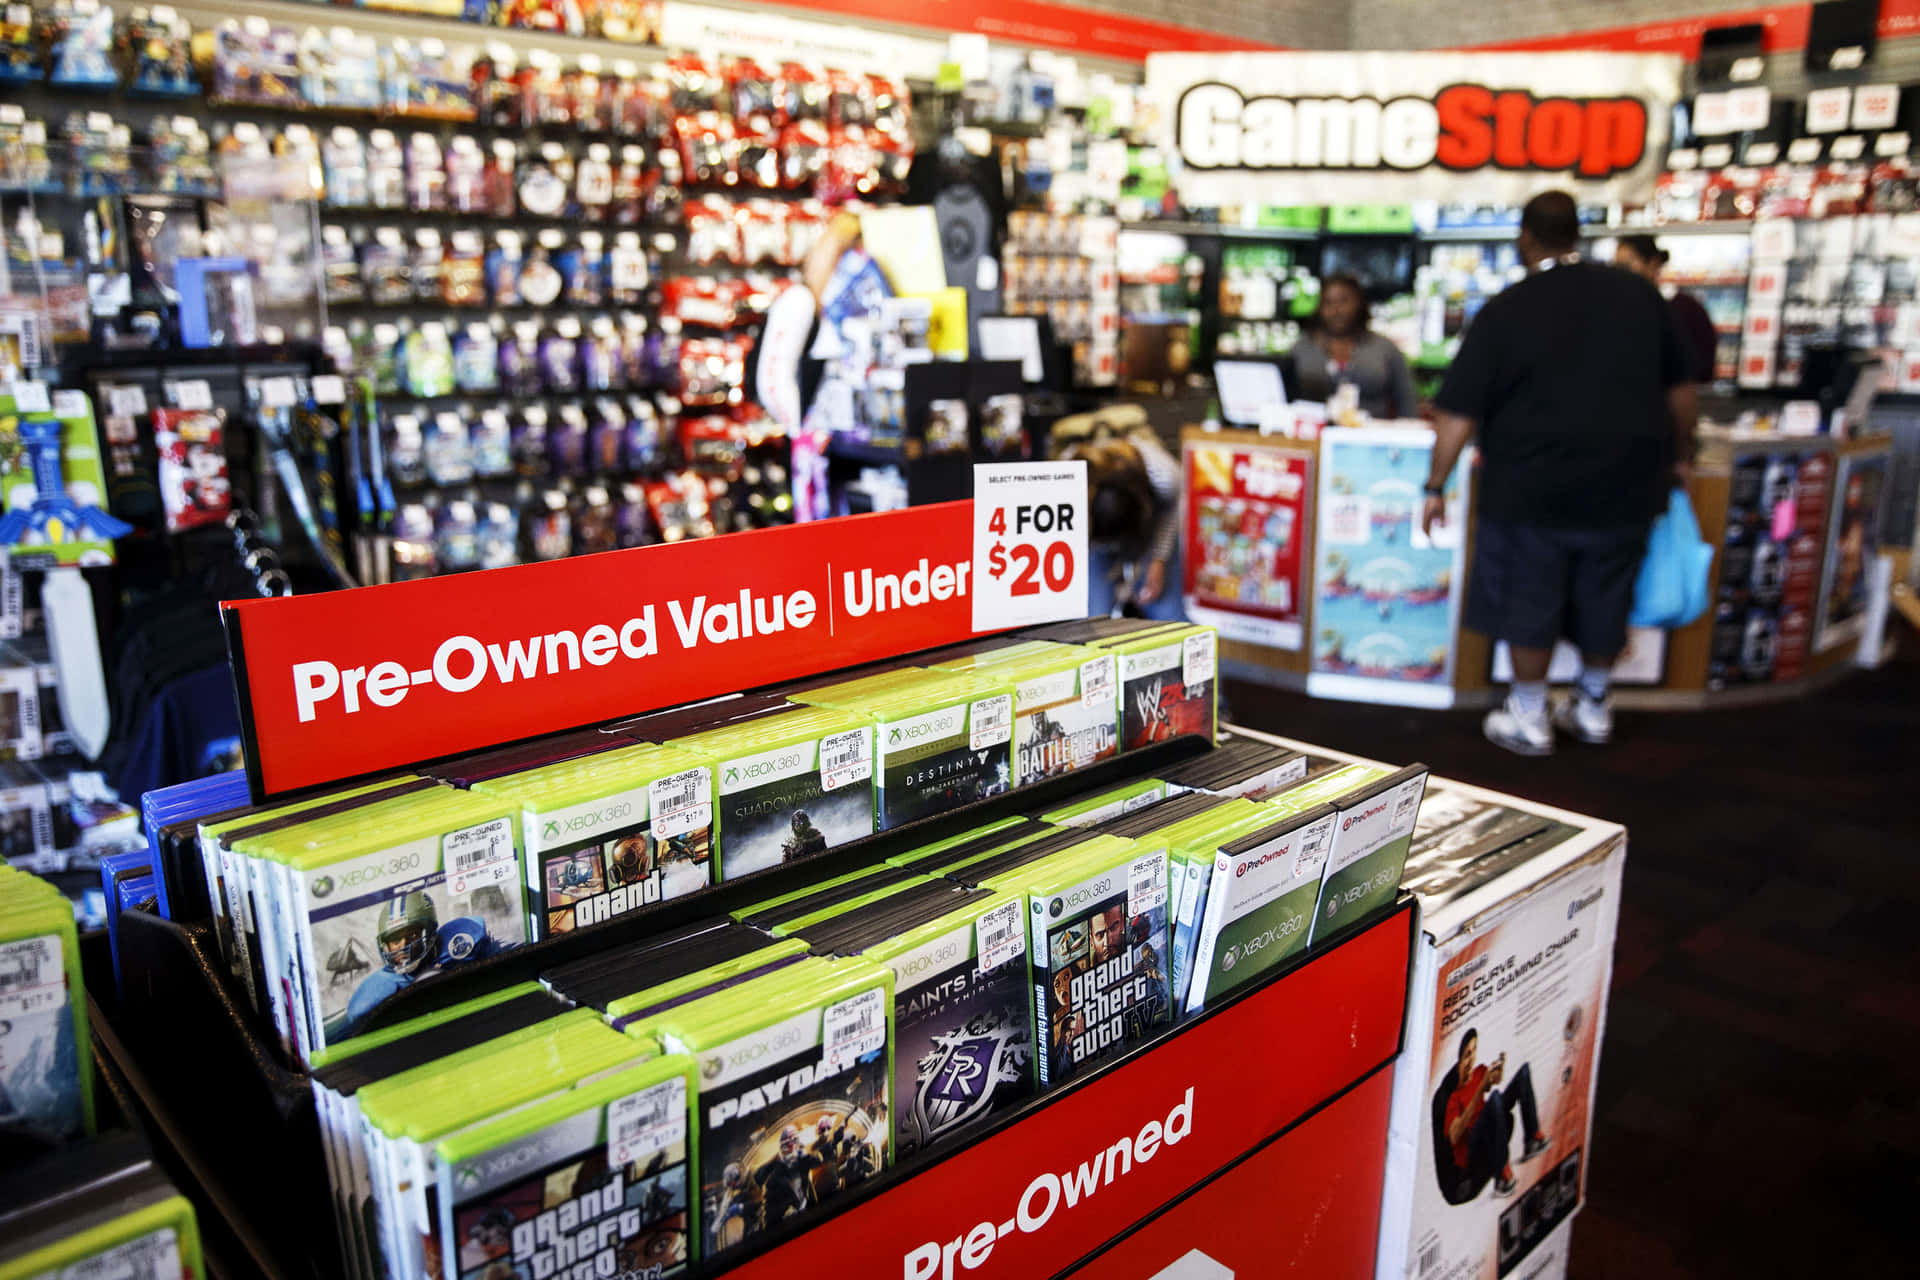 Get Ready For Exciting Gaming Sessions With Gamestop